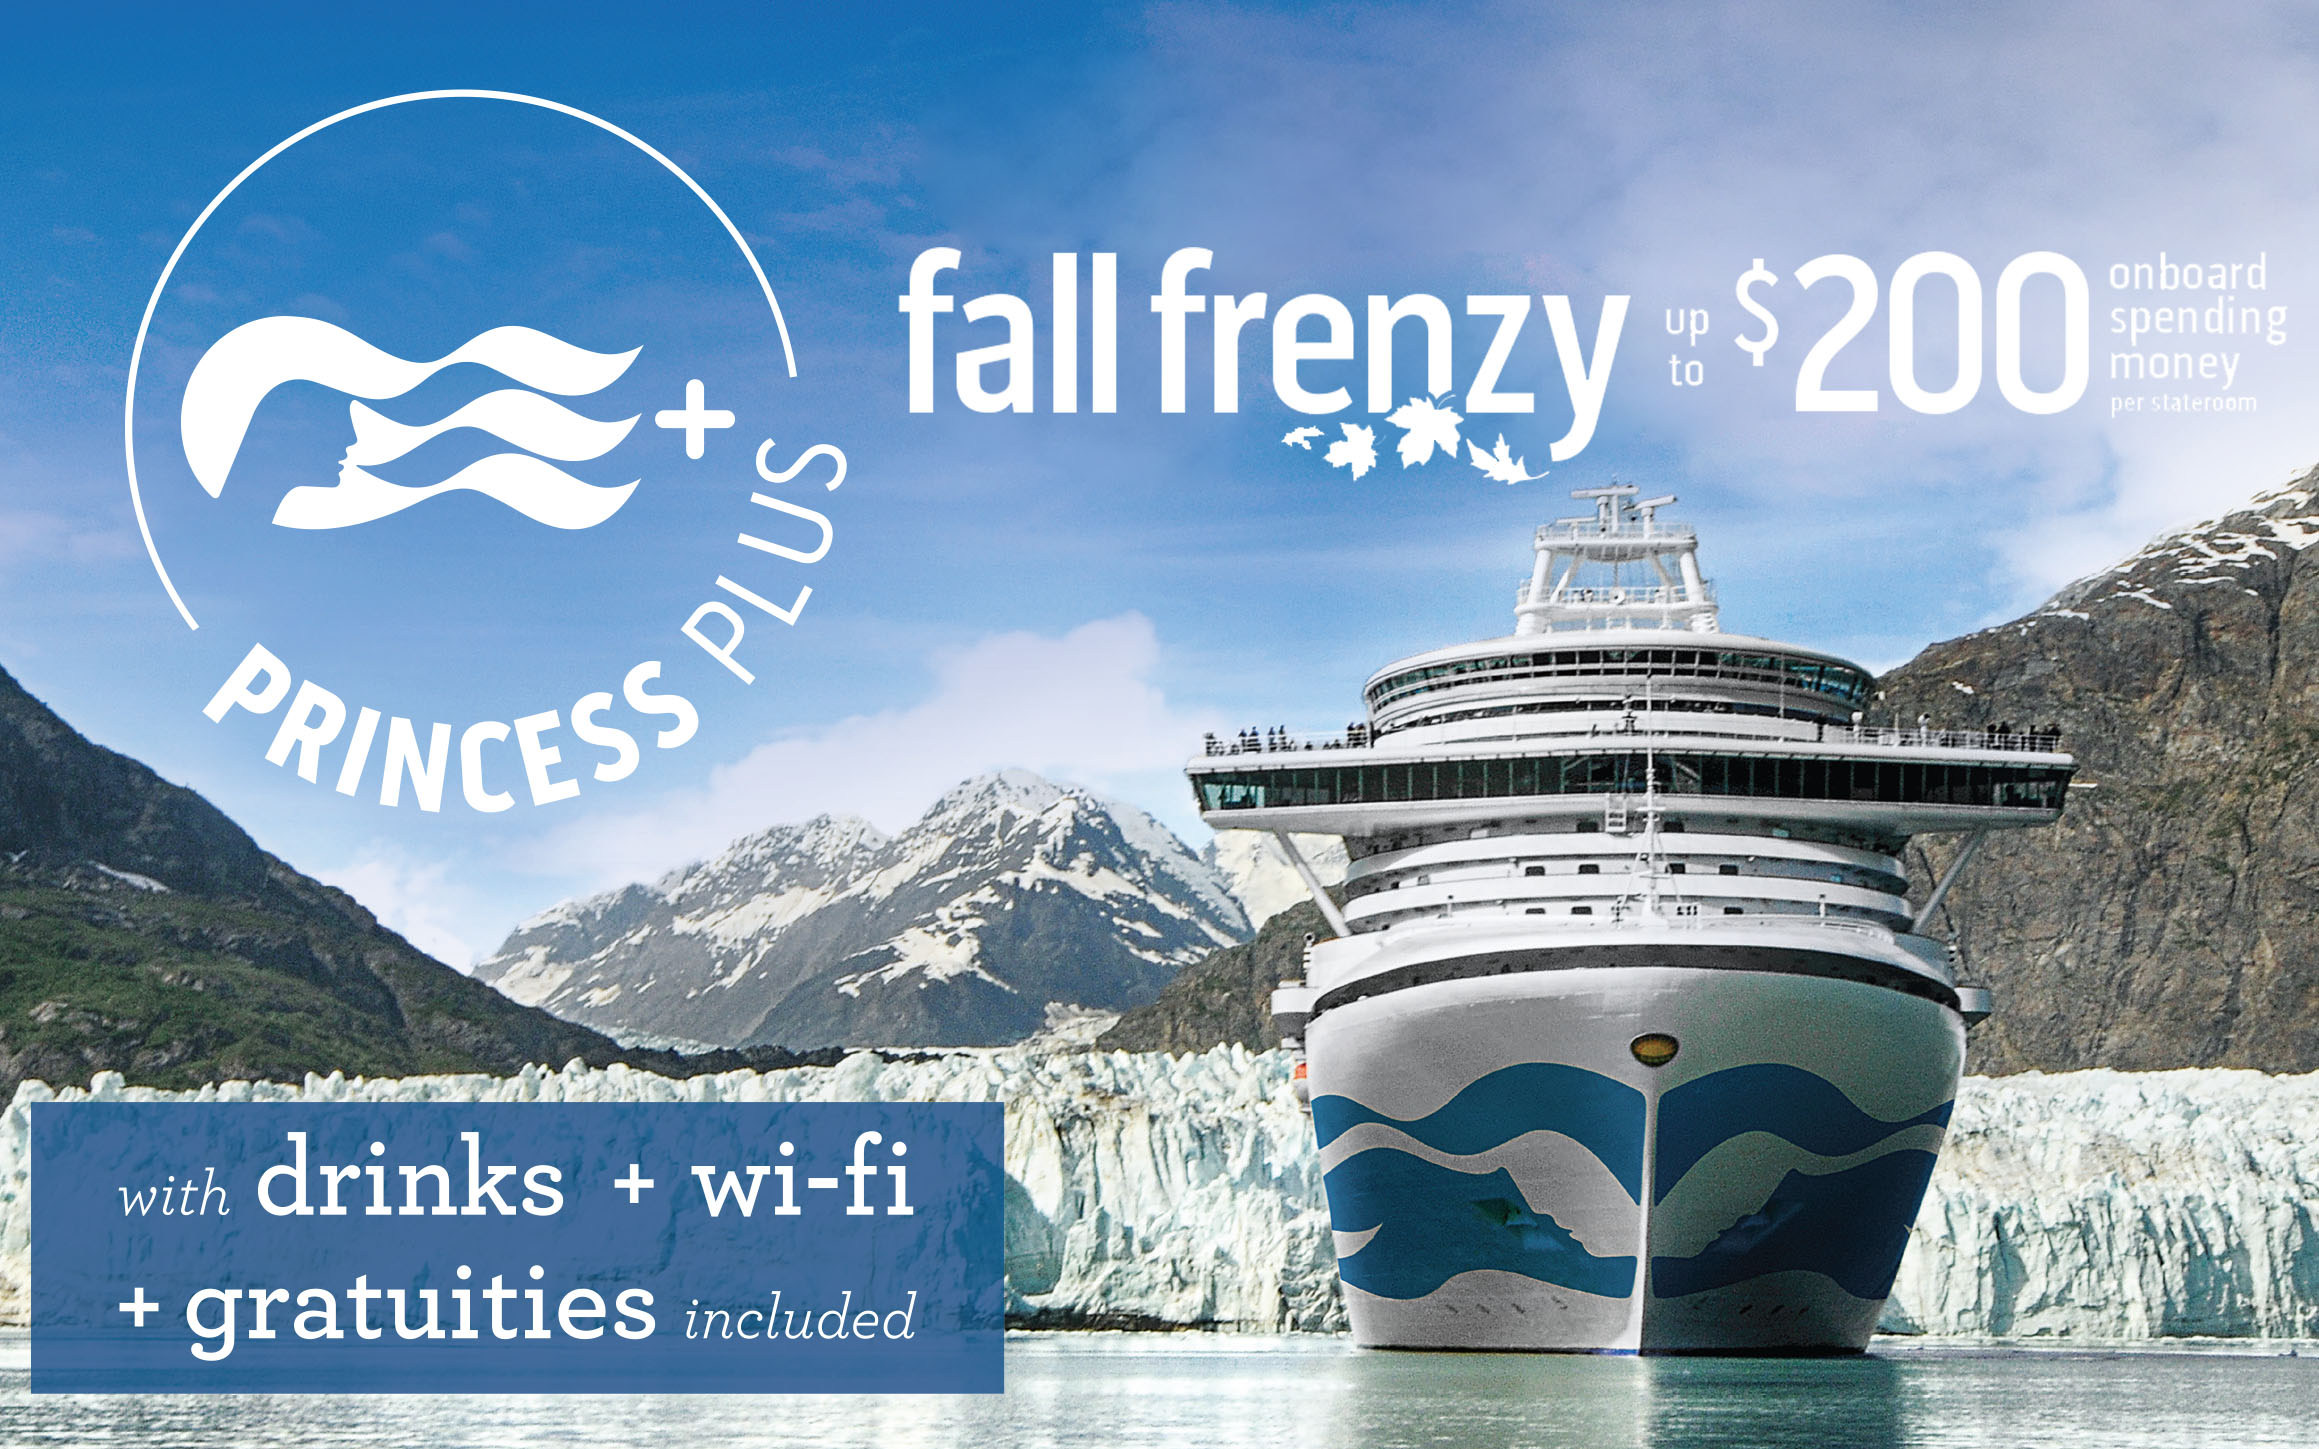 Princess - FREE Drinks + FREE Wi-Fi + FREE gratuities + Up to $200 onboard spending money